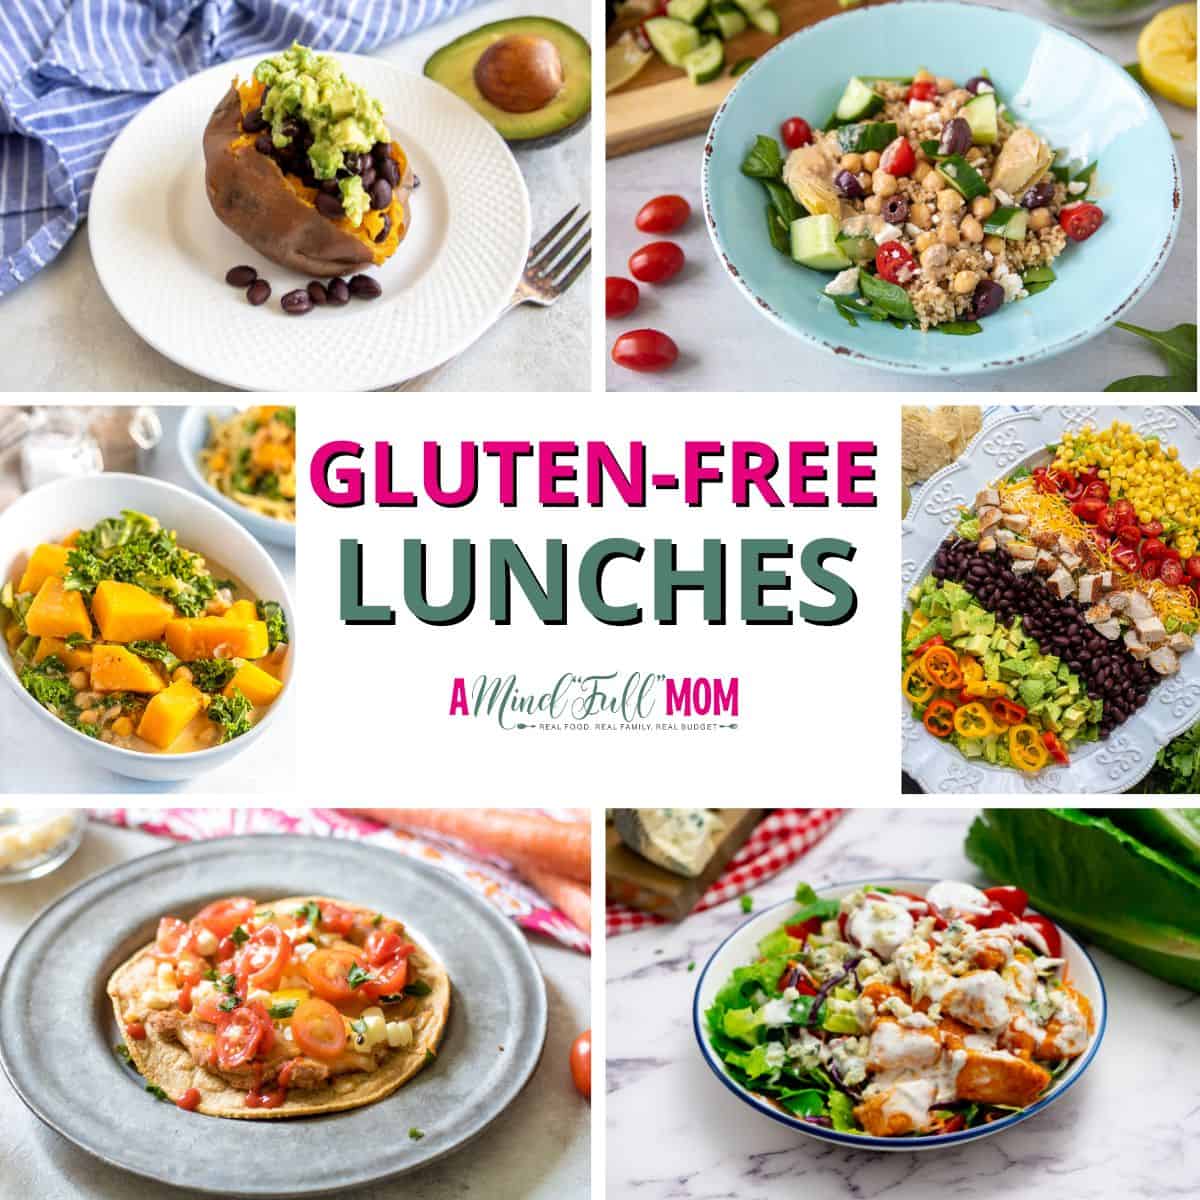 Gluten free lunches are now easier then every before with all the